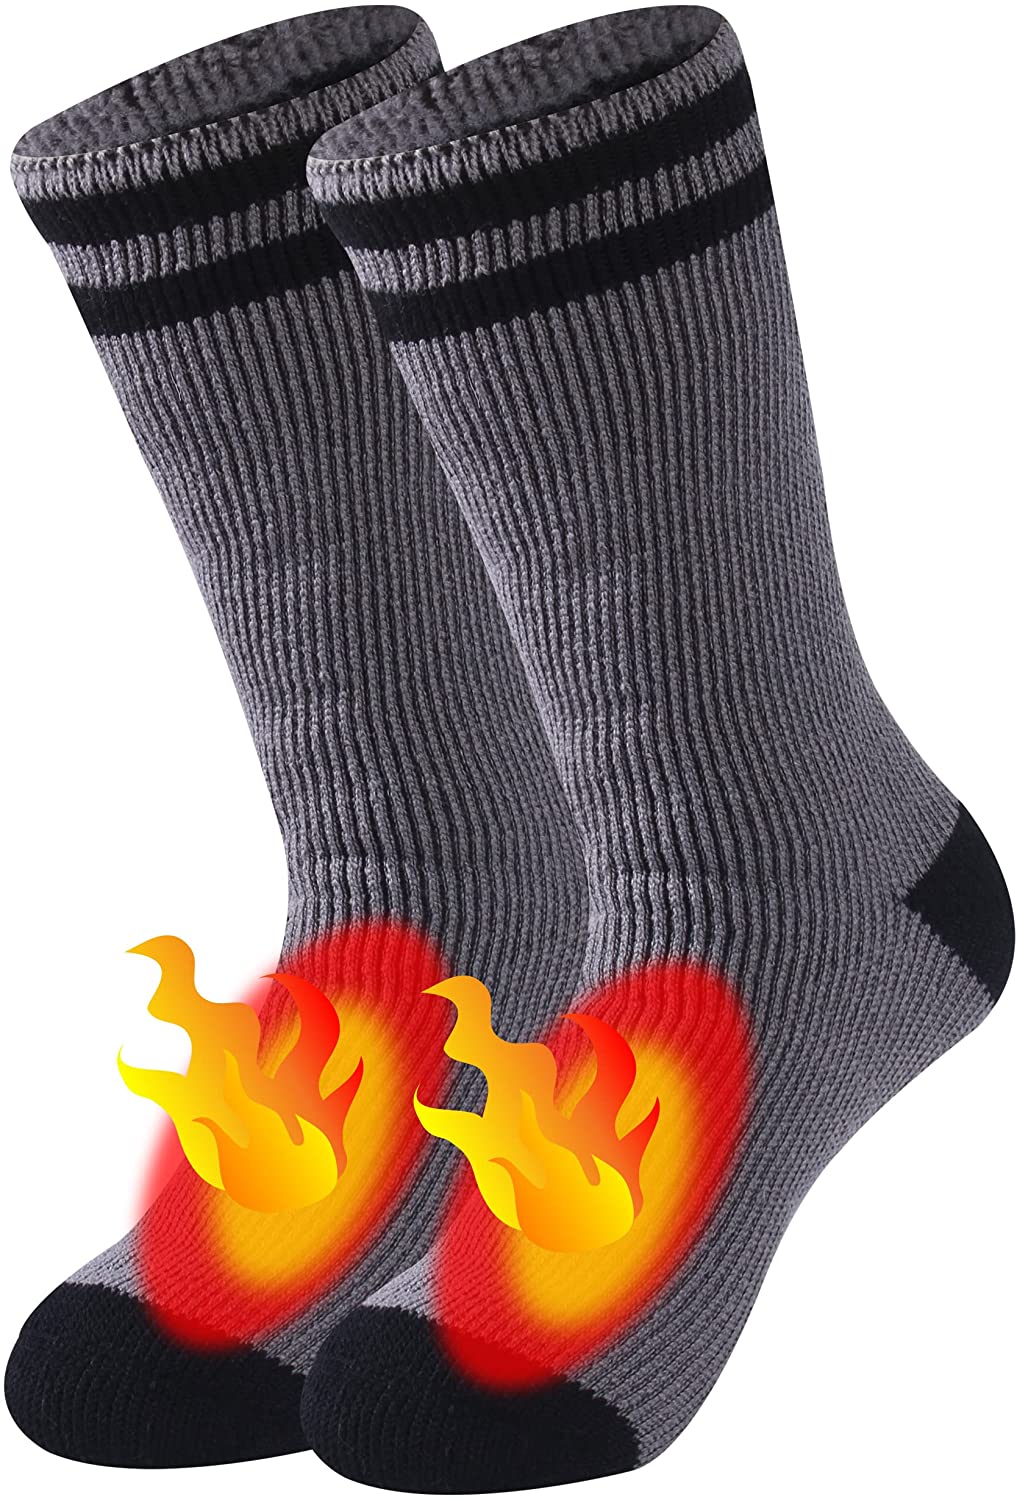 Hissox Unisex Thick Warm Insulated Heated Crew Slipper Socks for Cold Weather Winter Thermal Socks with Grippers